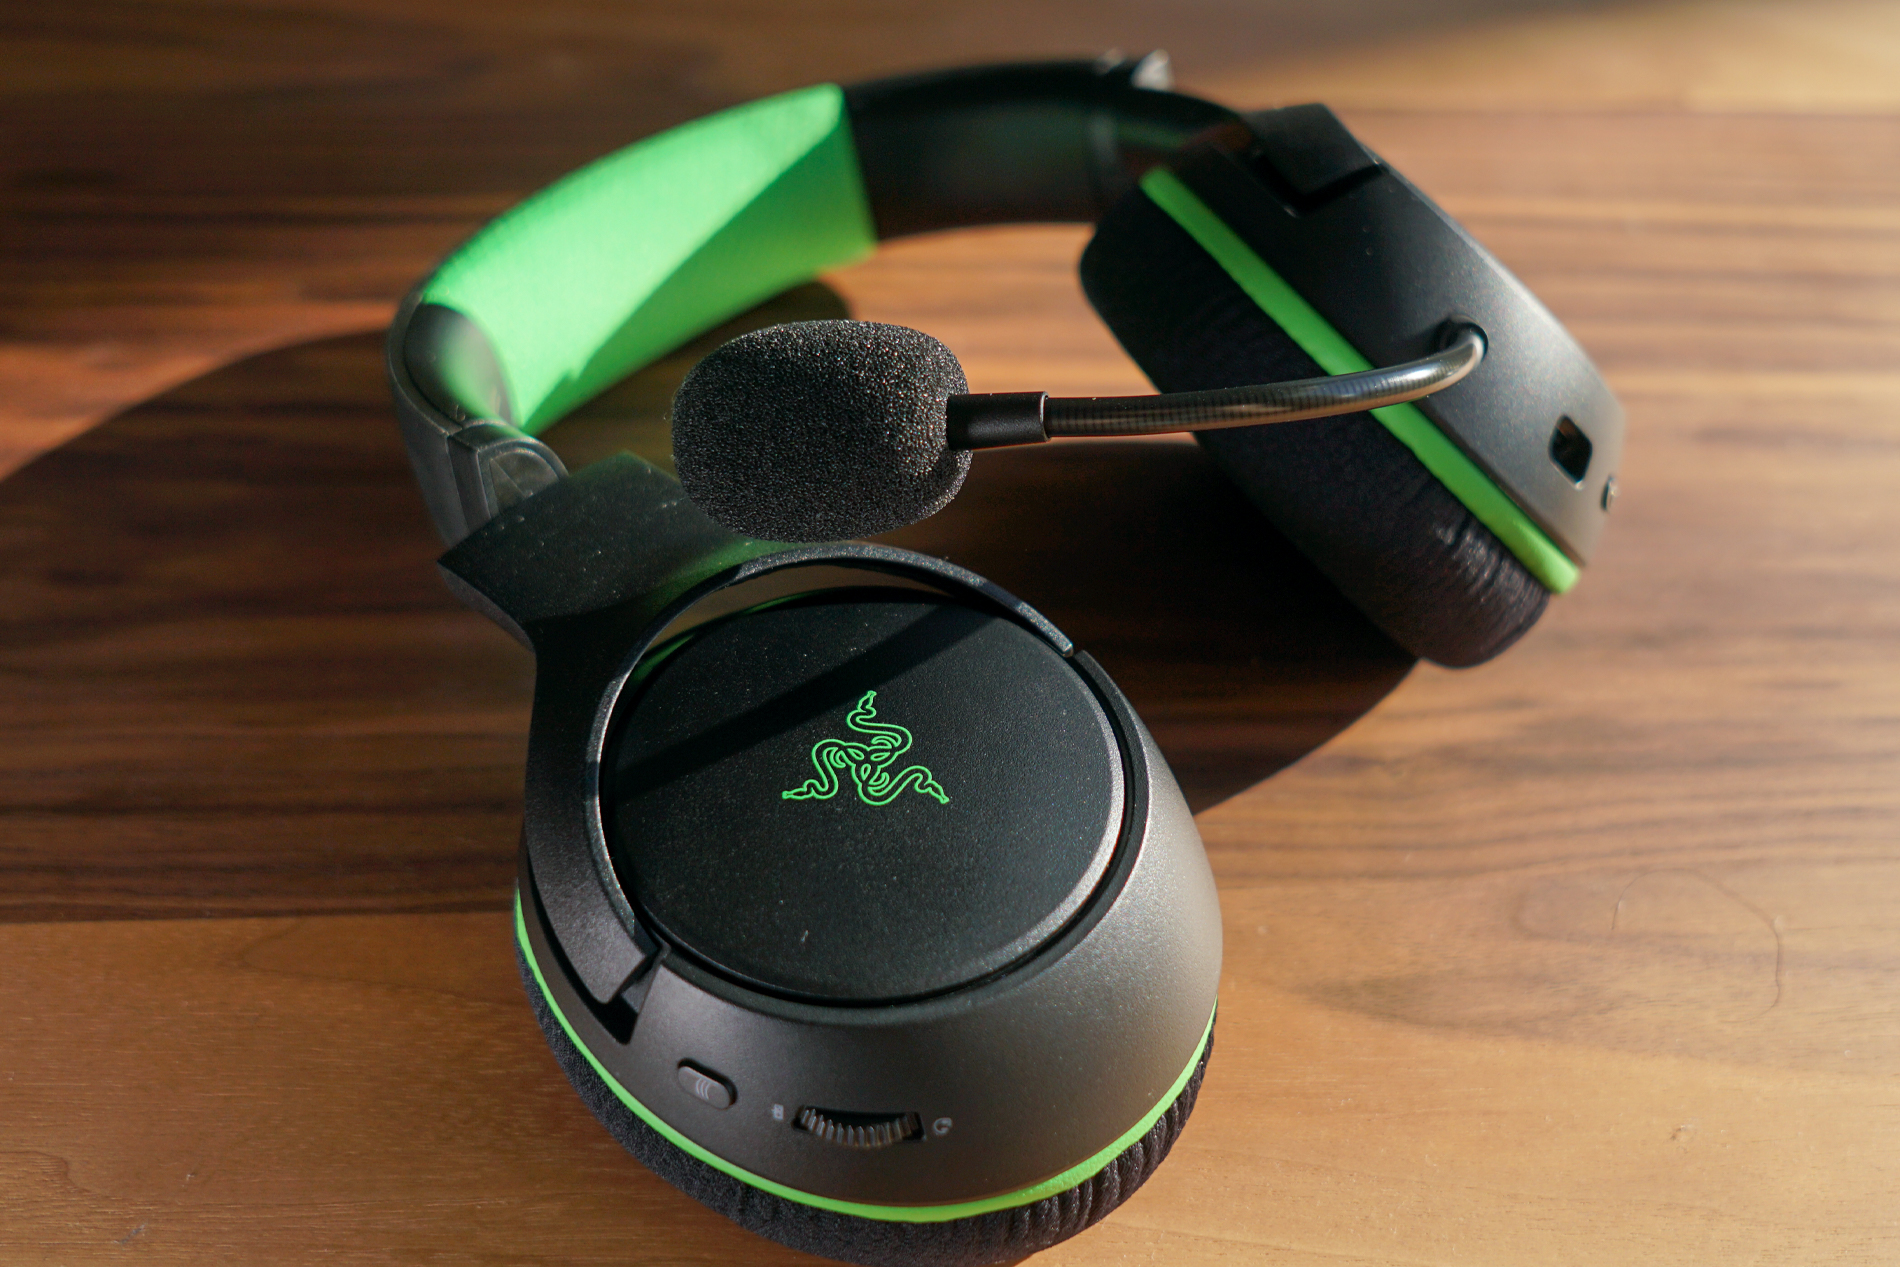 The Razer Kaira Wireless lays on a wooden table with one headphone turned up and the other laying flat.